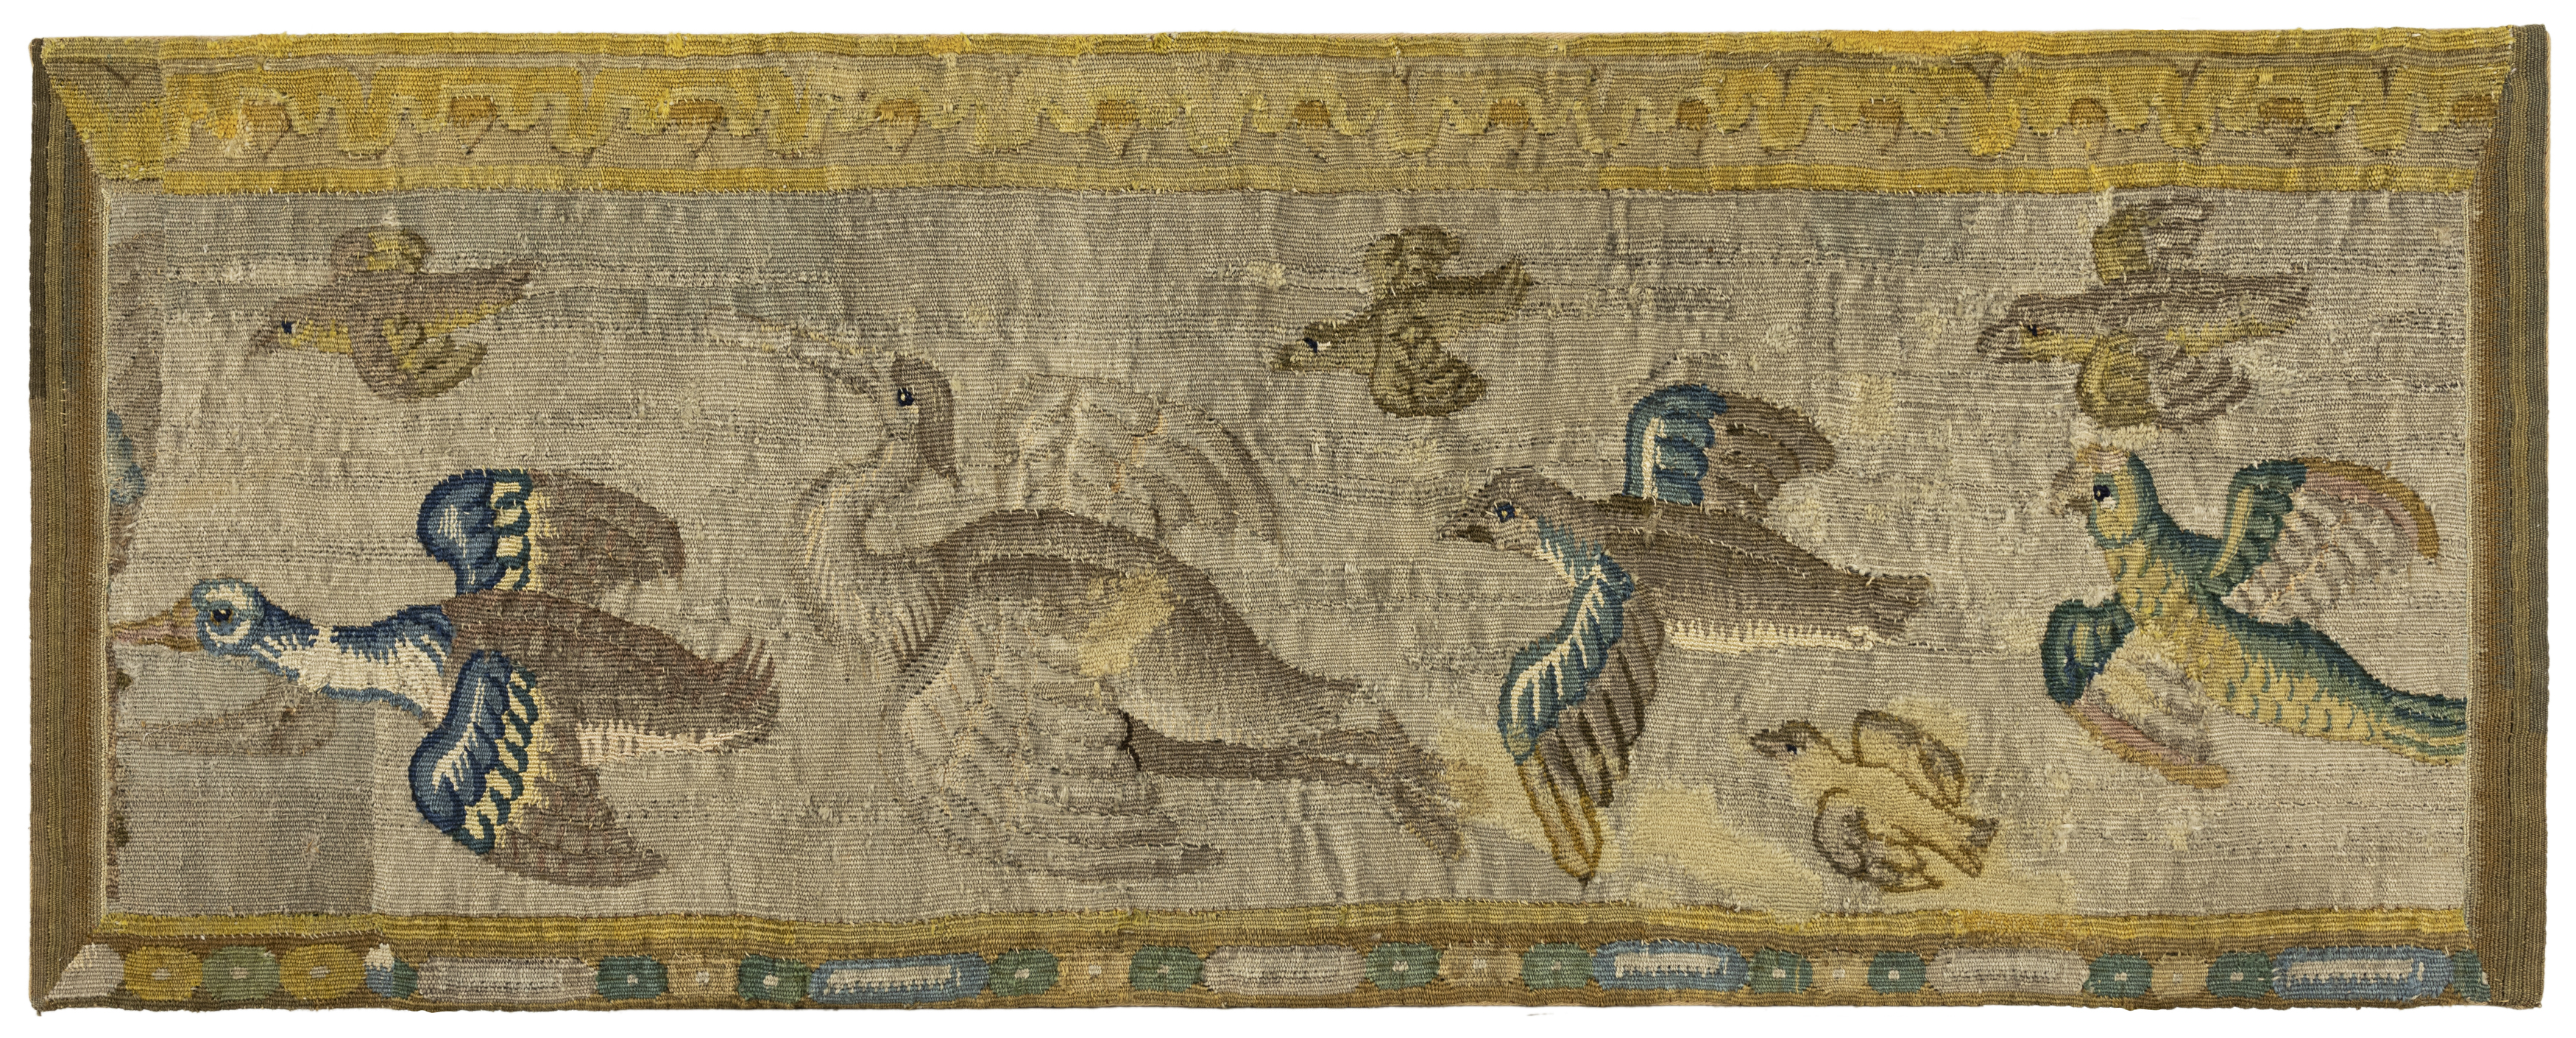 Three Flemish tapestry border fragments, 17th century, Woven in wools and silks, depicting flying... - Image 3 of 4